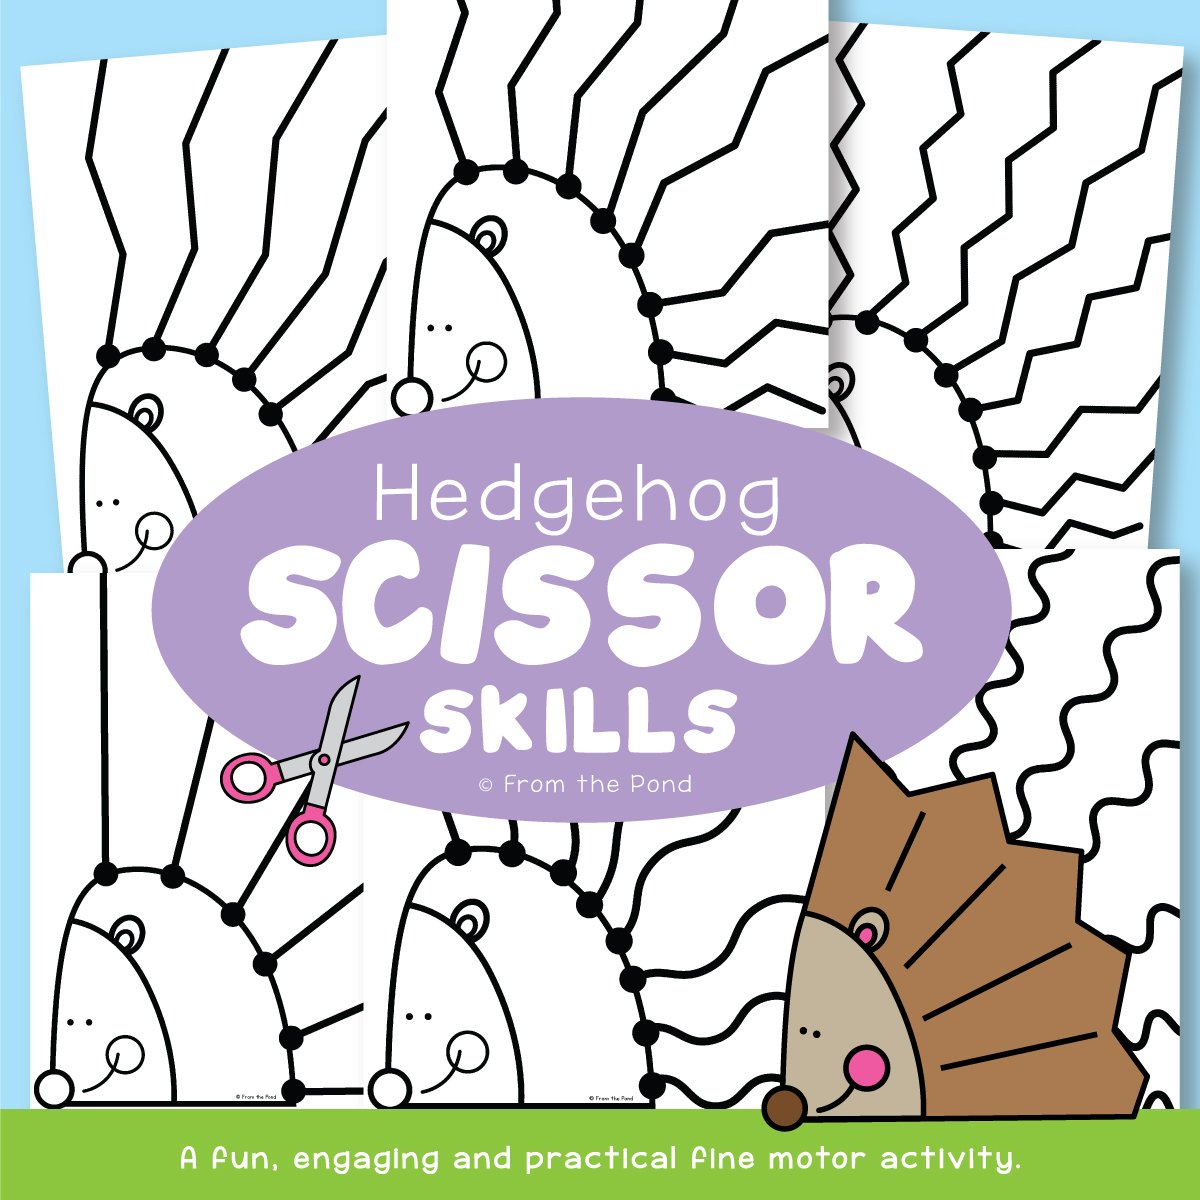 Giant Cut and Reveal {Scissor Skills Practice} • Little Pine Learners